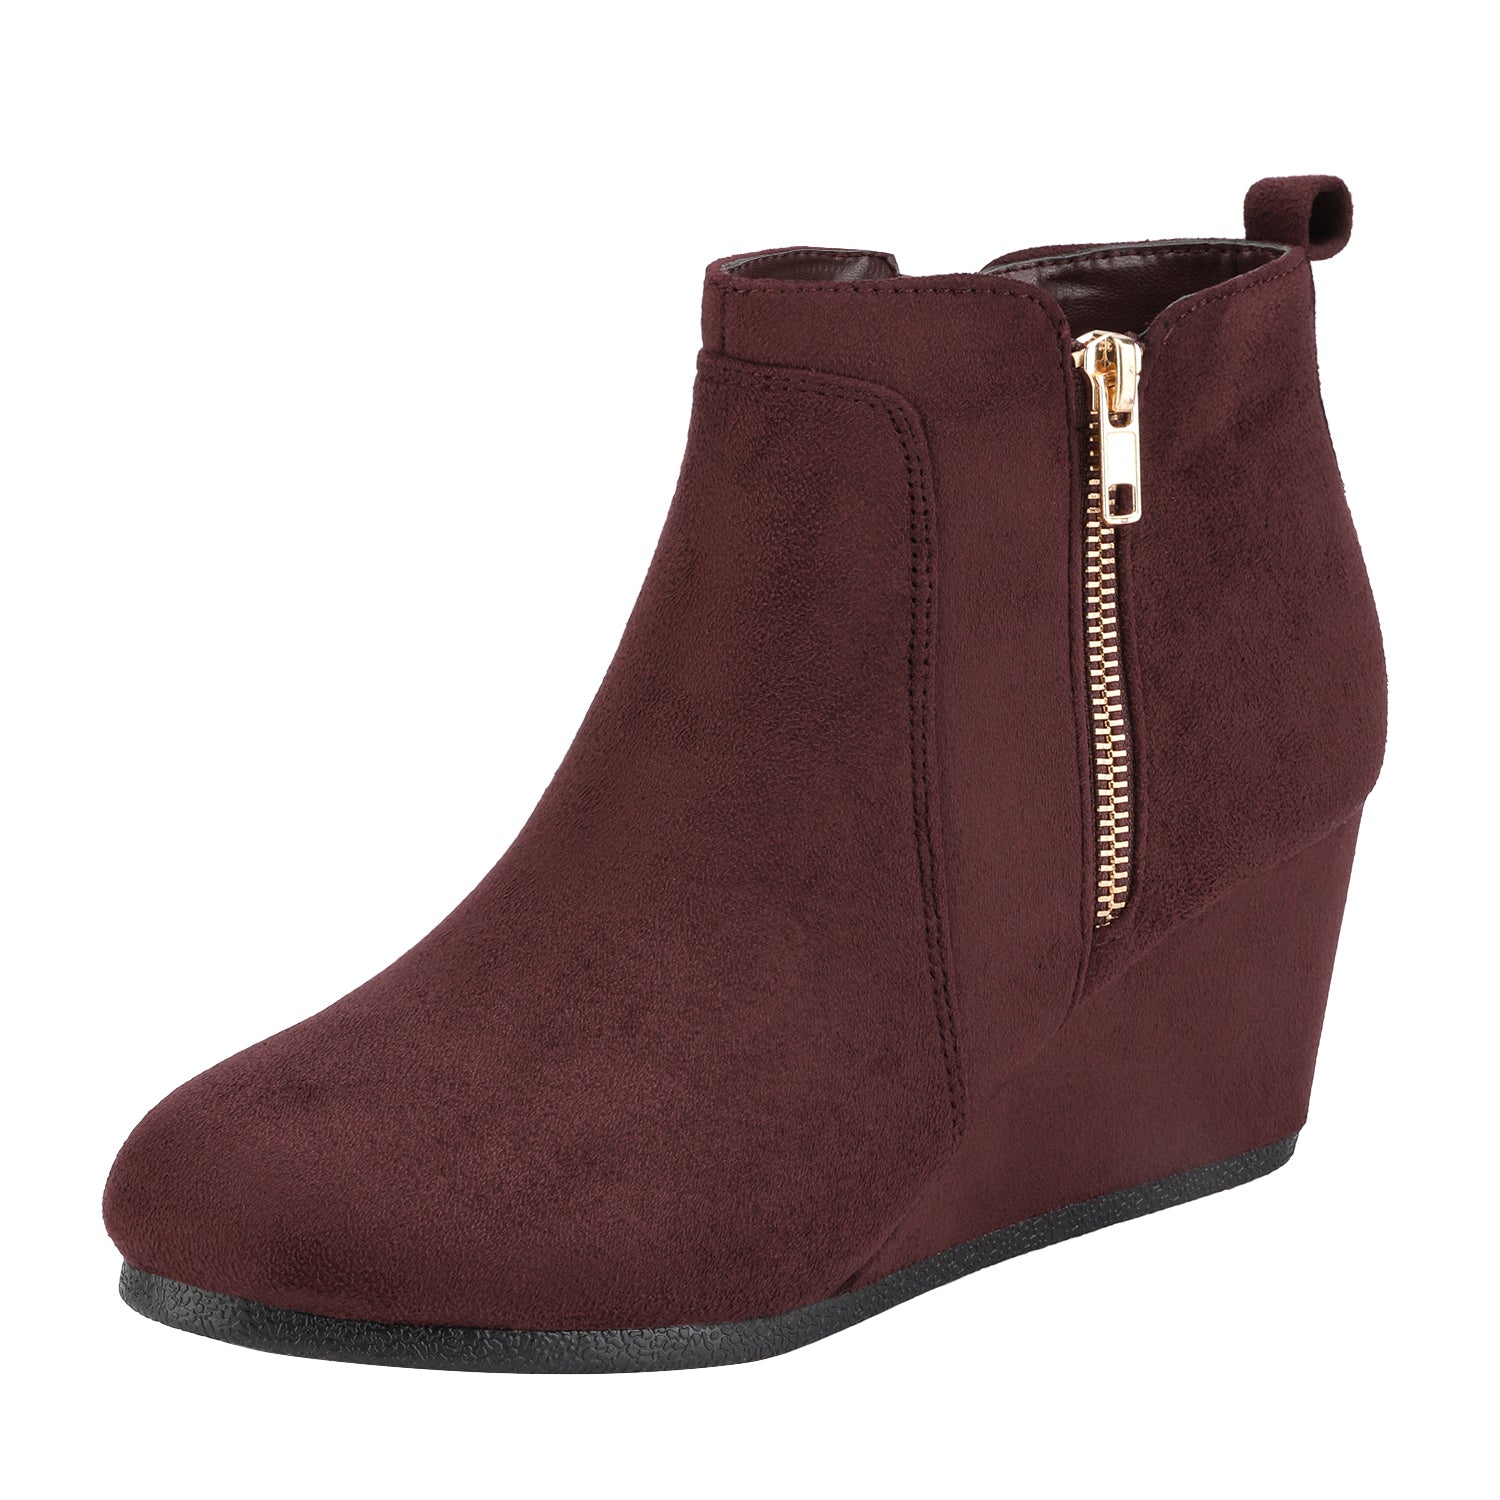 Dream Pairs Women’s Suede Ankle Boots